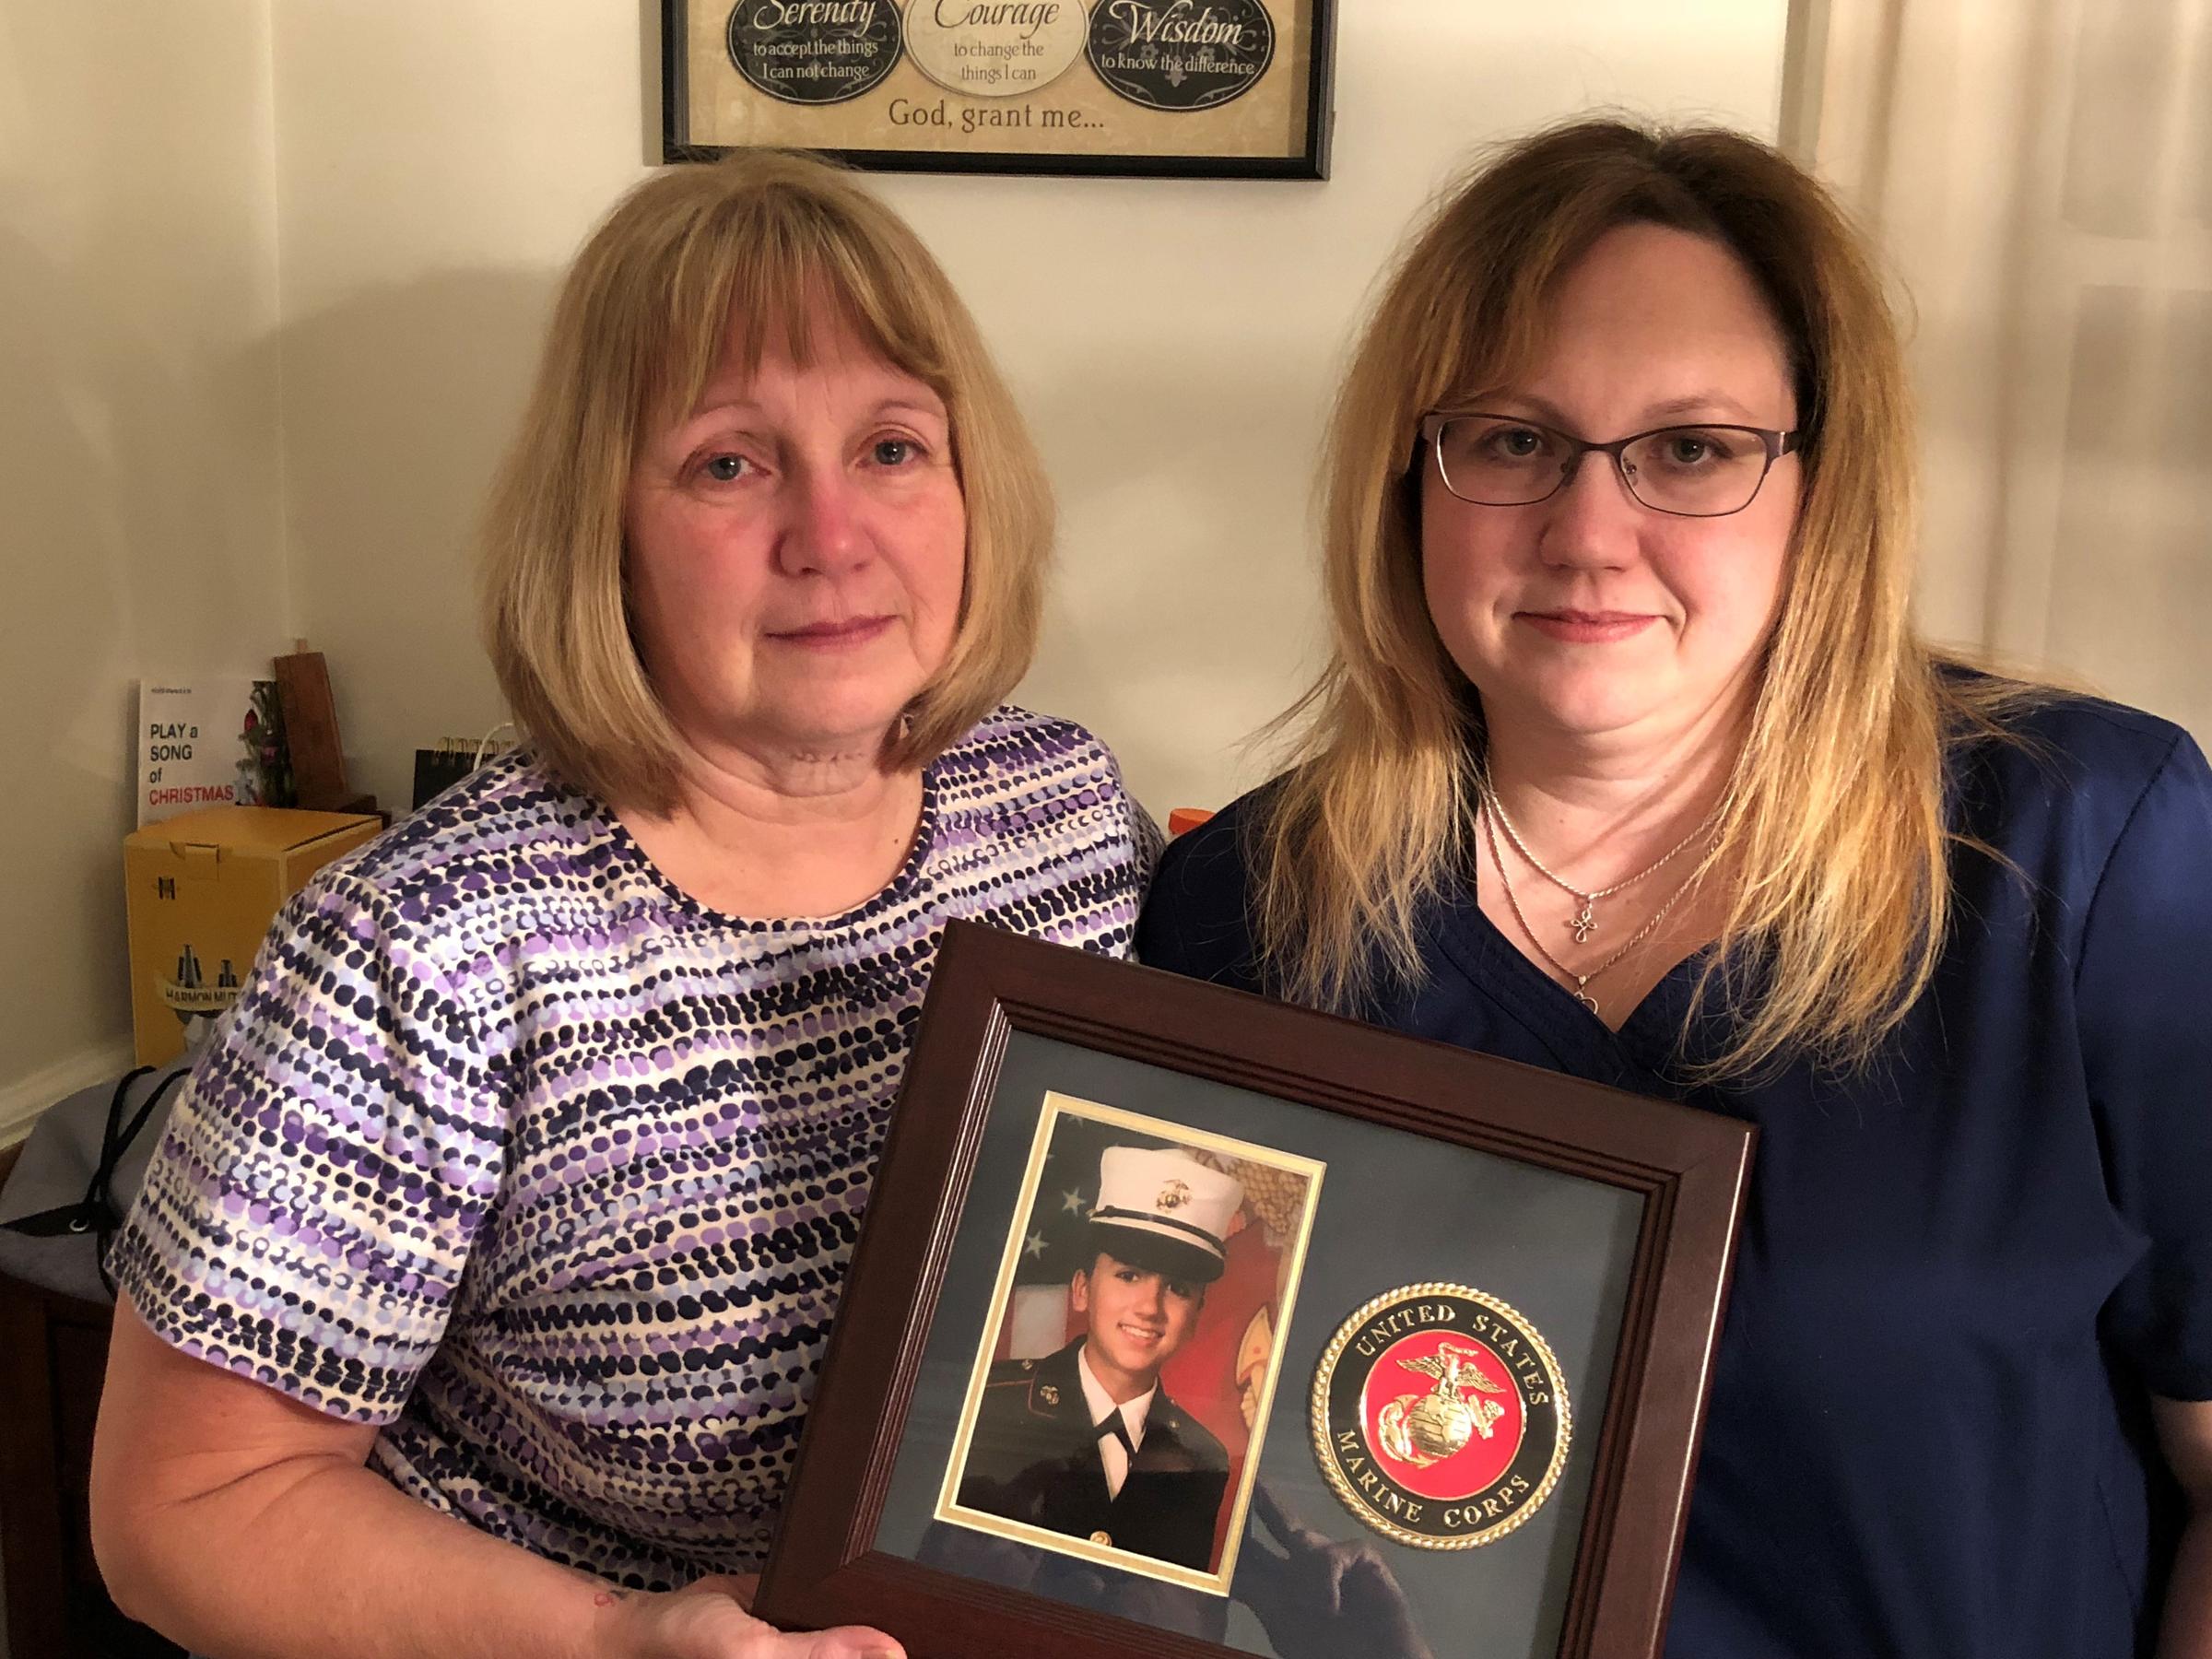 Deana Martorella Orellana's mother, Laurel Martorella (left), and Orellana's sister, Robin Jewell, hold her Marine Corps photo. Orellana killed herself a year after leaving the Marines. She had agreed to undergo counseling the day she died.